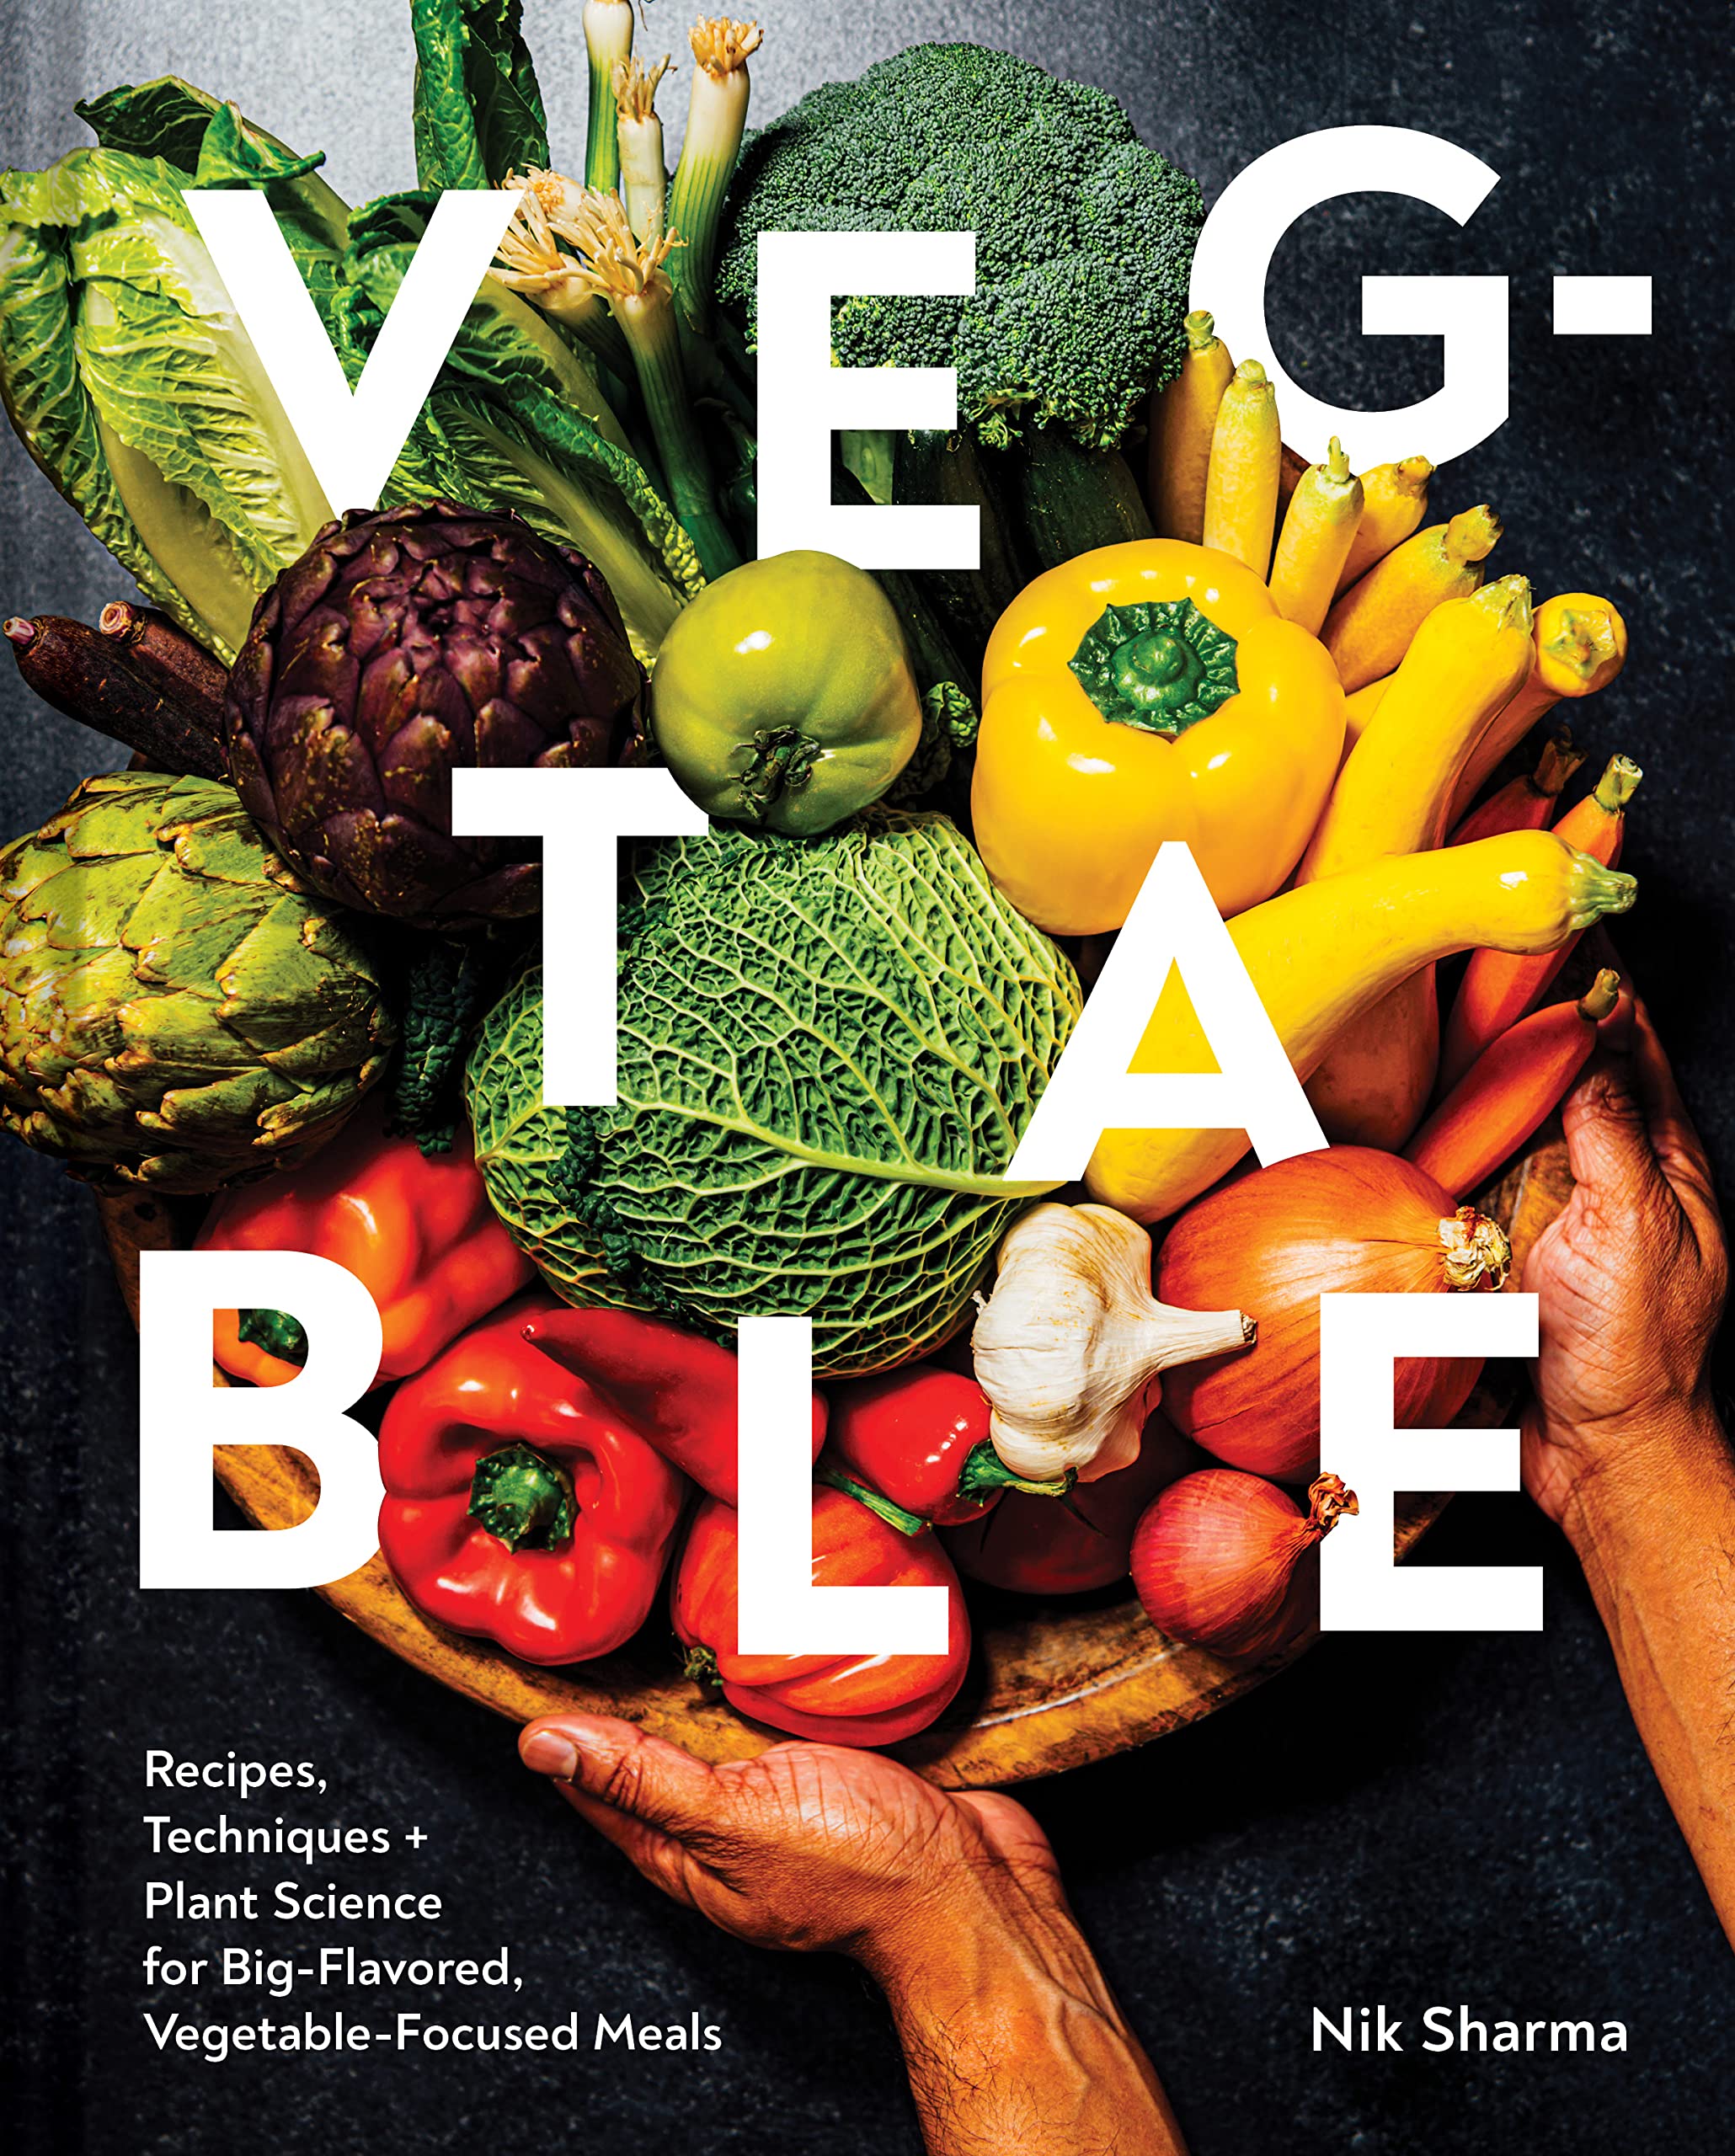 Veg-table: Recipes, Techniques, and Plant Science for Big-Flavored, Vegetable-Focused Meals (Nik Sharma) *Signed*